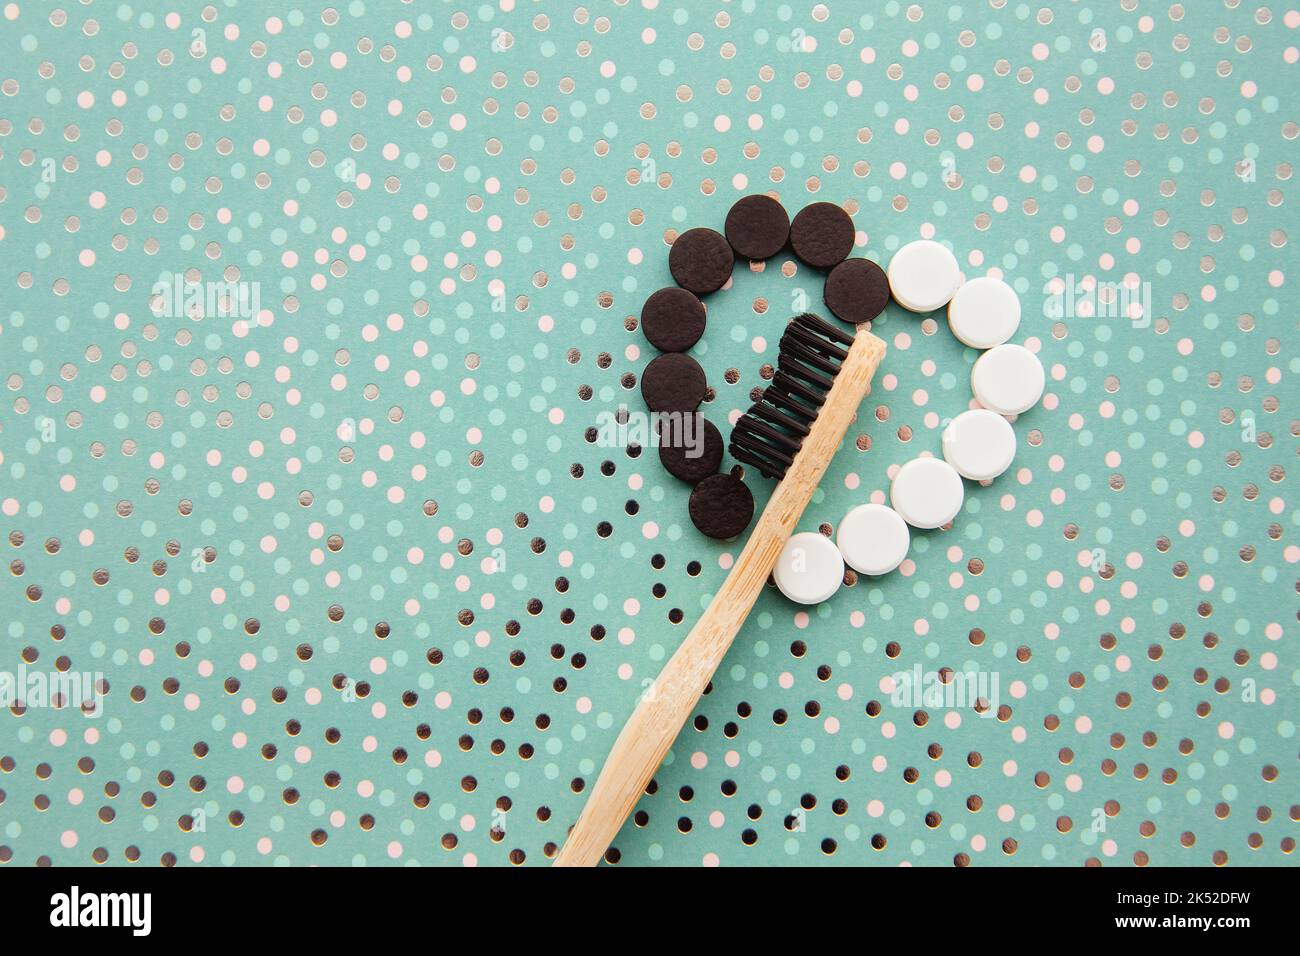 Above view of black activated charcoal and white fluoride toothpaste tablets with bamboo toothbrush. Dental care concept. Minimal mint green dotted. Stock Photo